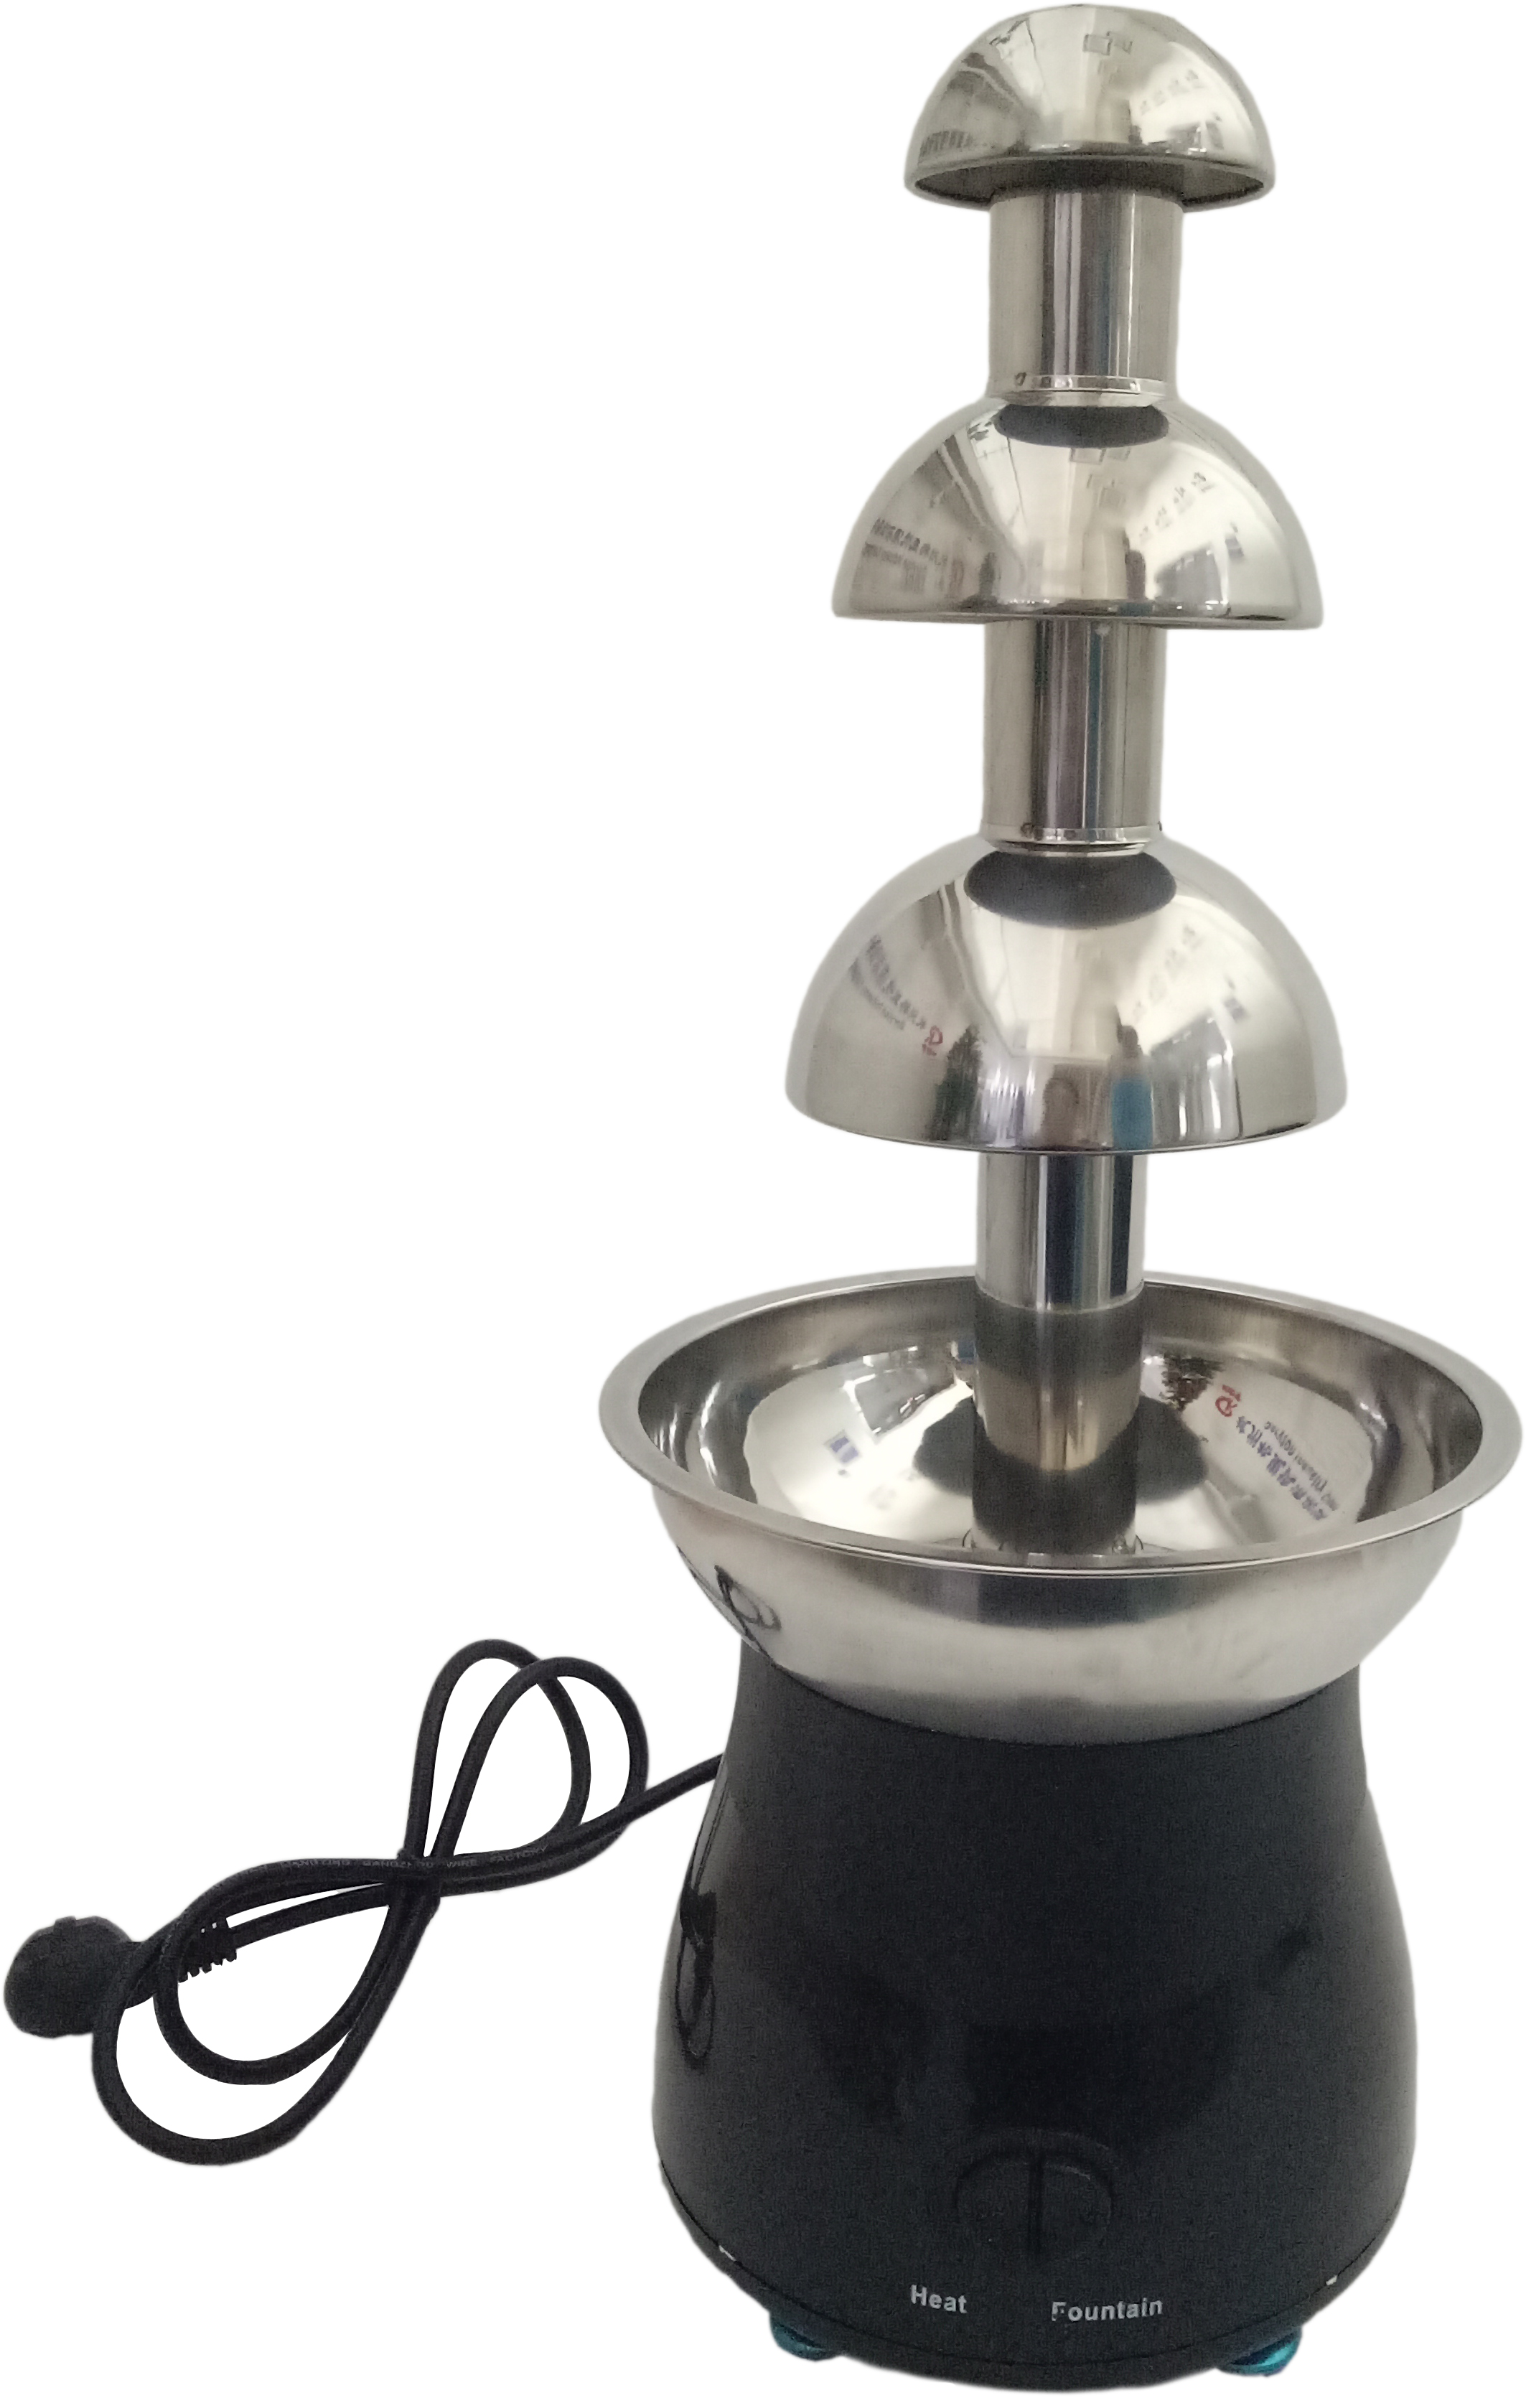 GRT-CF55 Commercial Stainless Steel Chocolate Fondue Fountain Machine For Sale